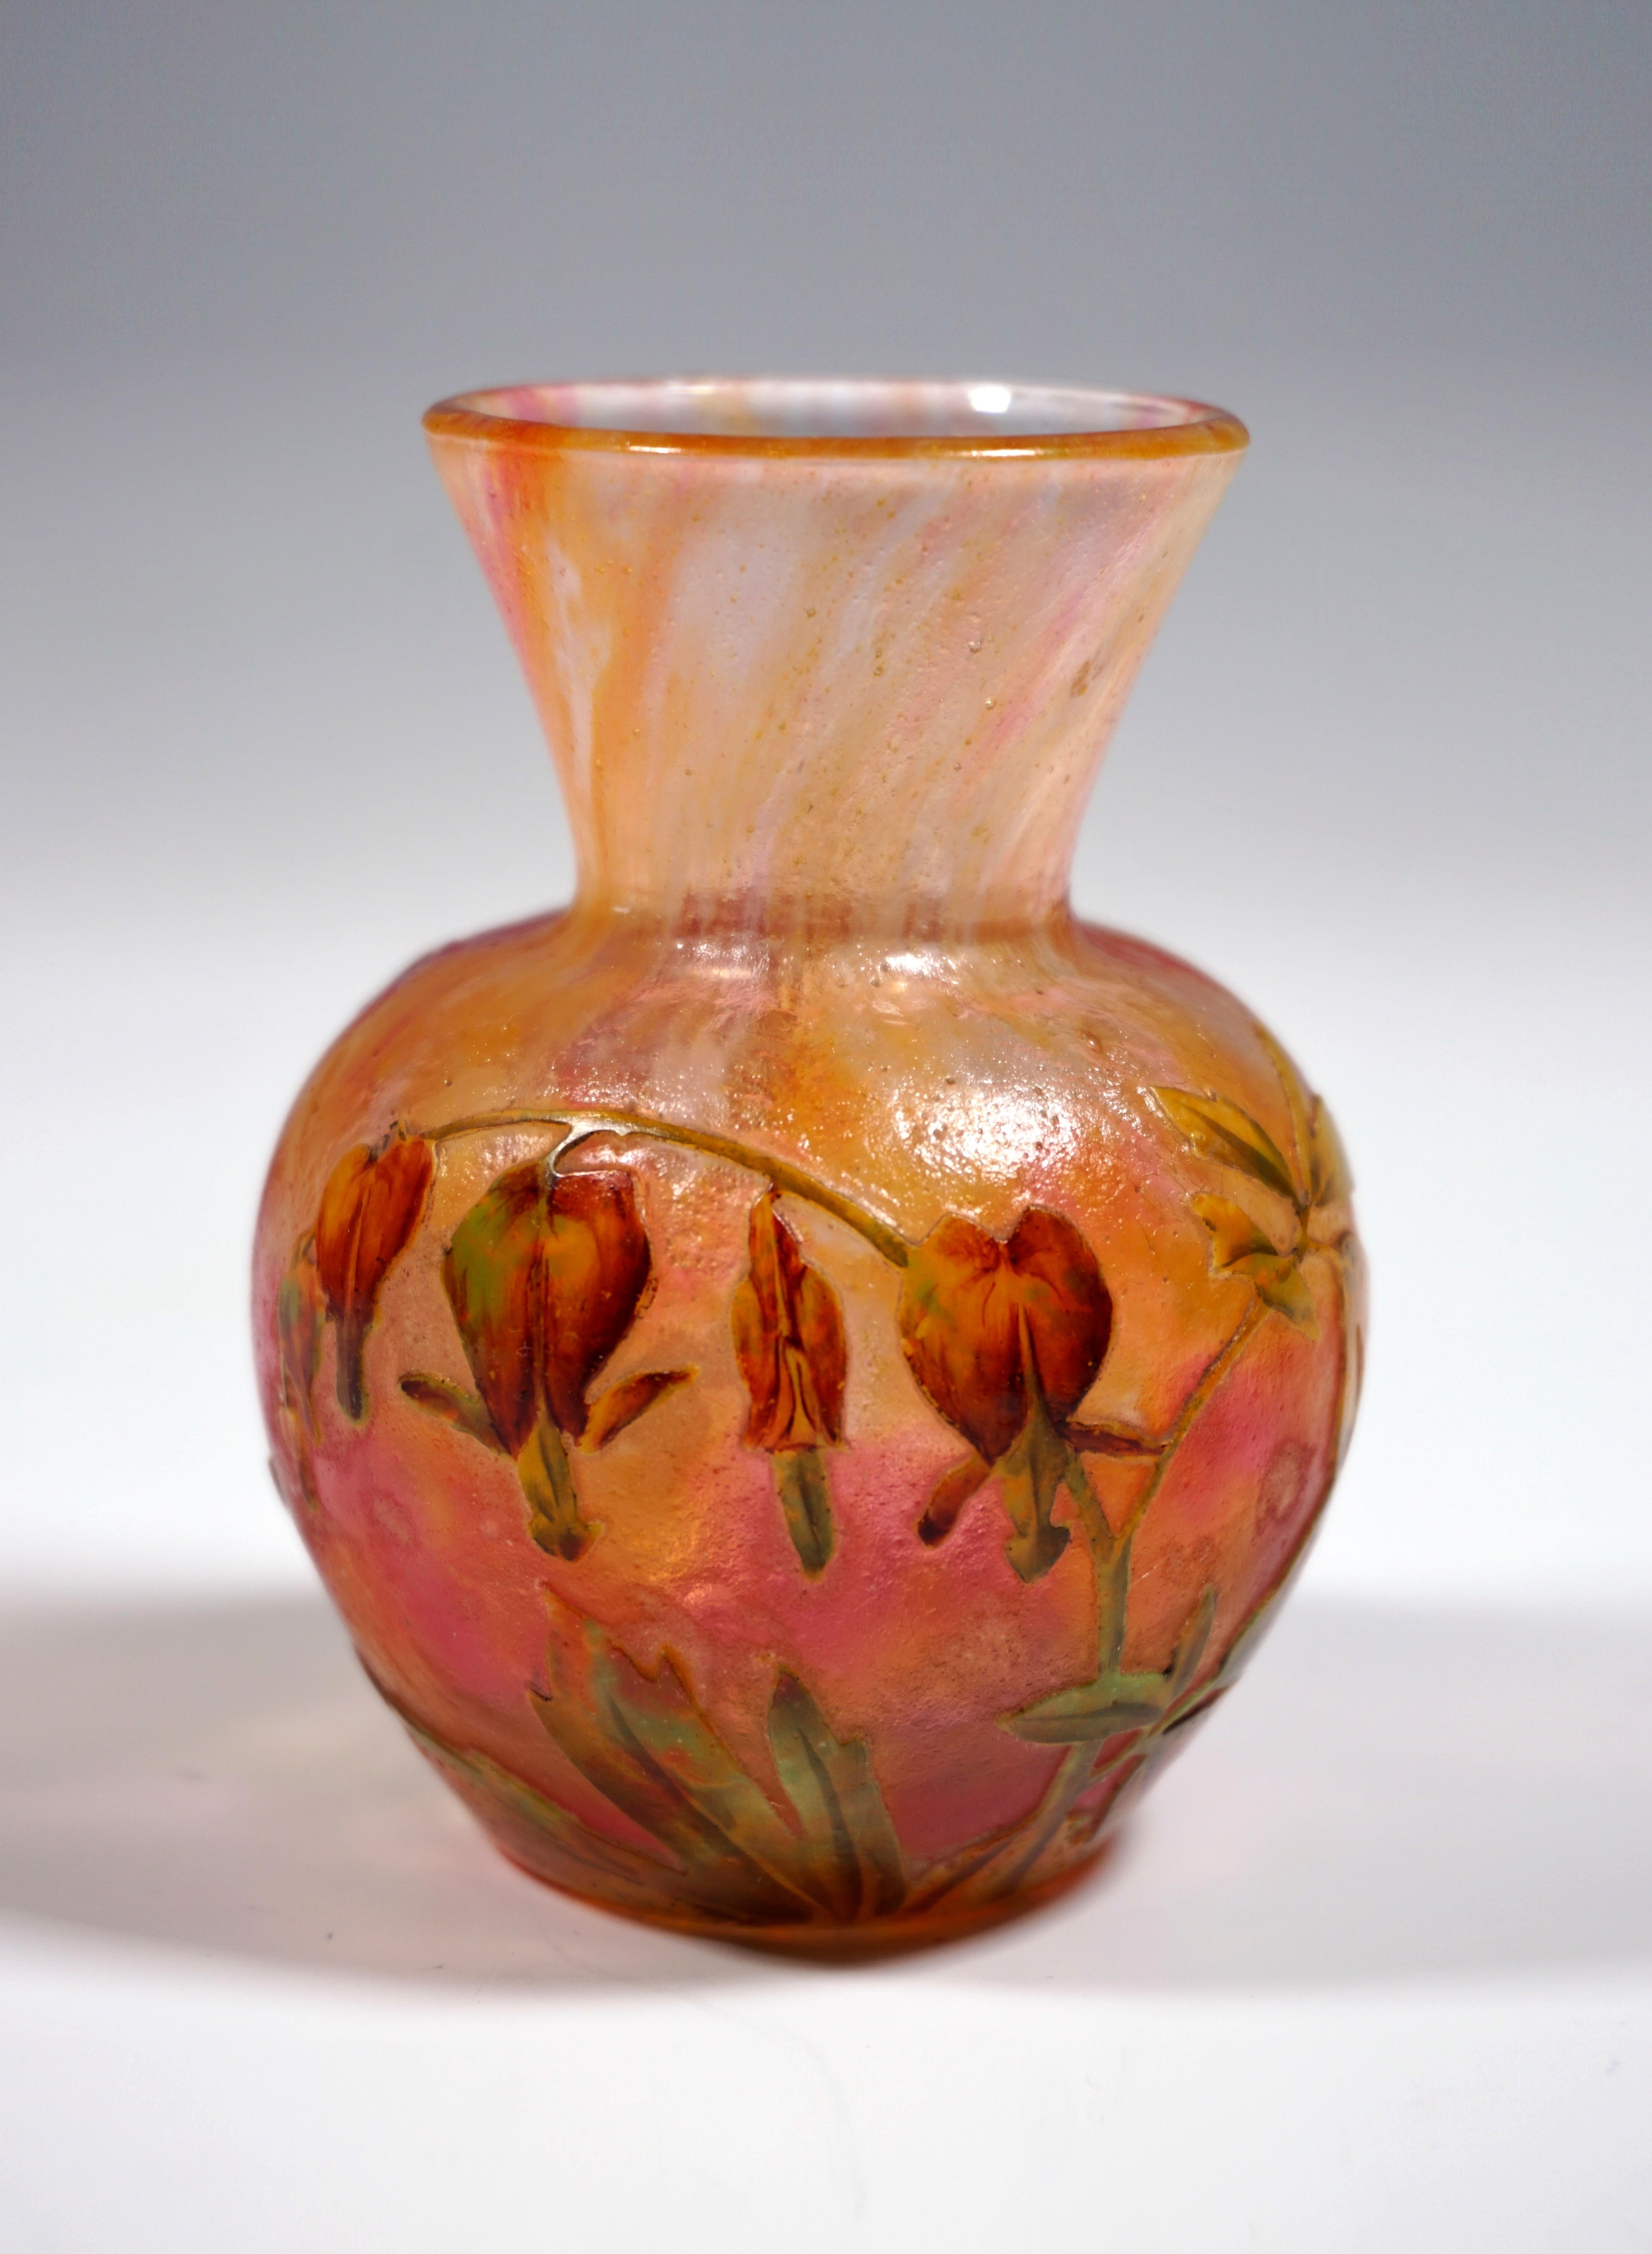 Very rare and exceptional piece of Art Nouveau glass:
Small baluster vase, bulbous body with attached, funnel-shaped neck. Colorless glass with colored powder inclusions in white, orange and pink, with highly etched 'Bleeding Heart' decoration